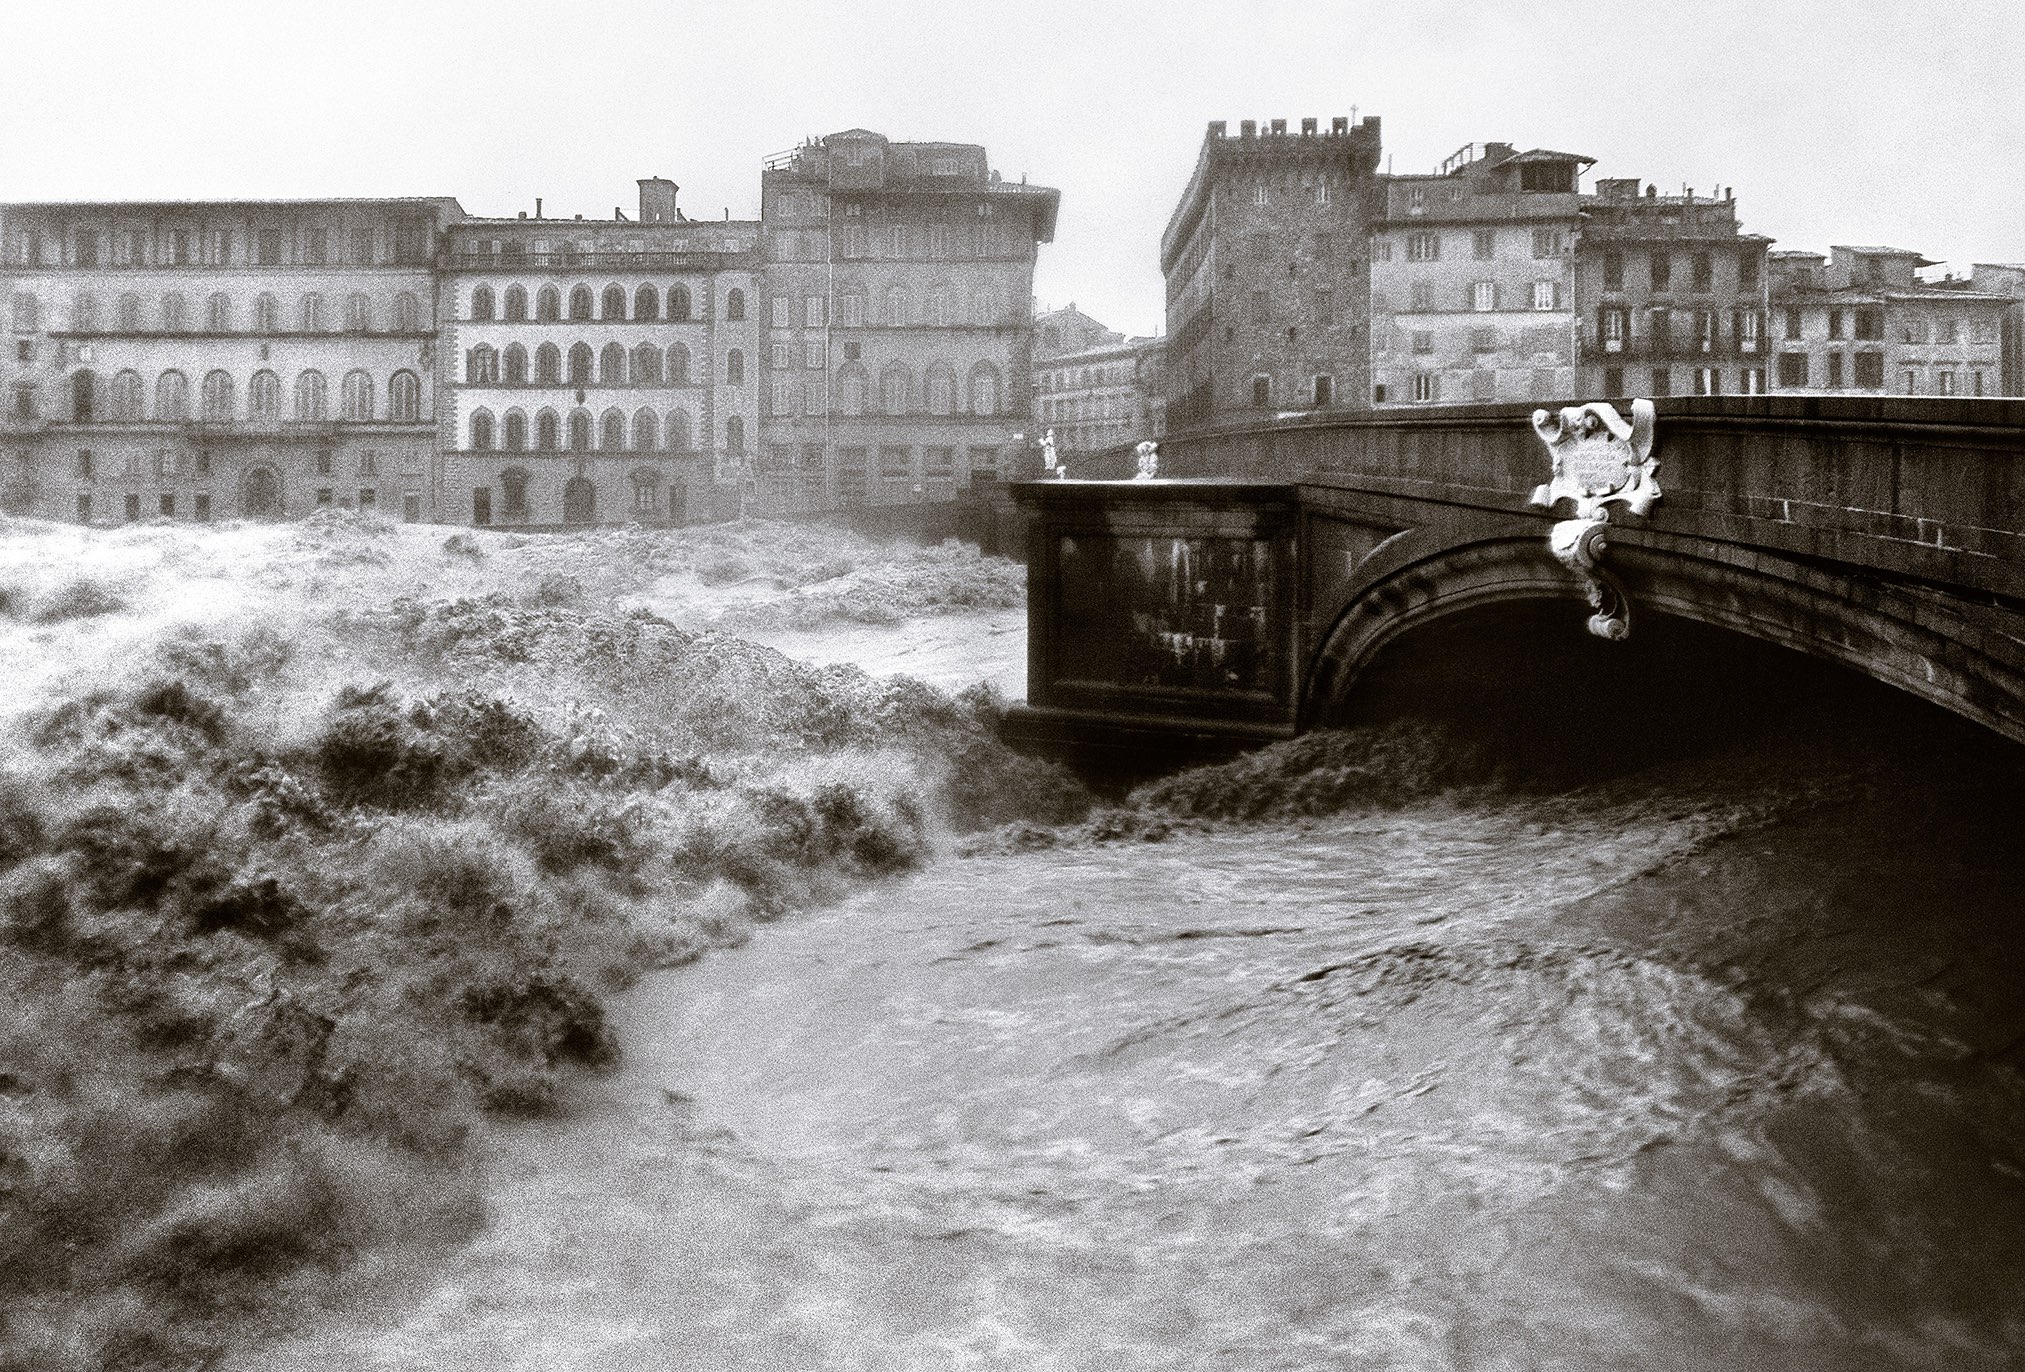 After the Great Flood of Florence